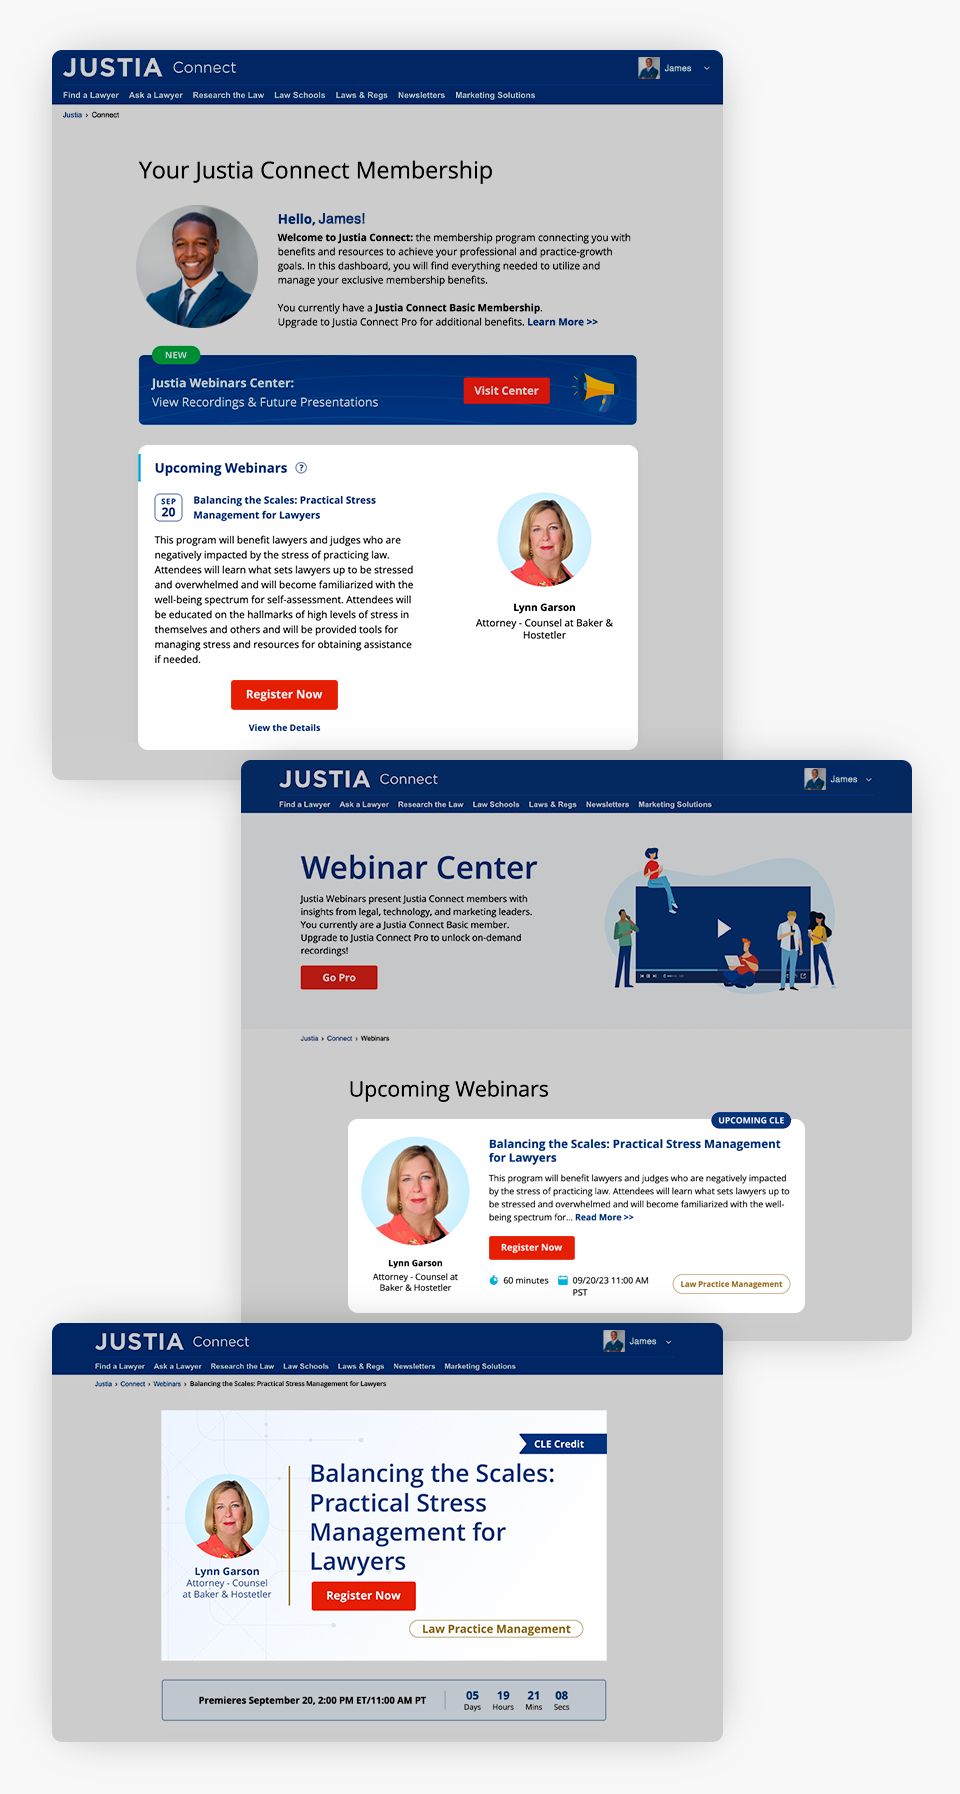 Ways to Access the Webinar Image